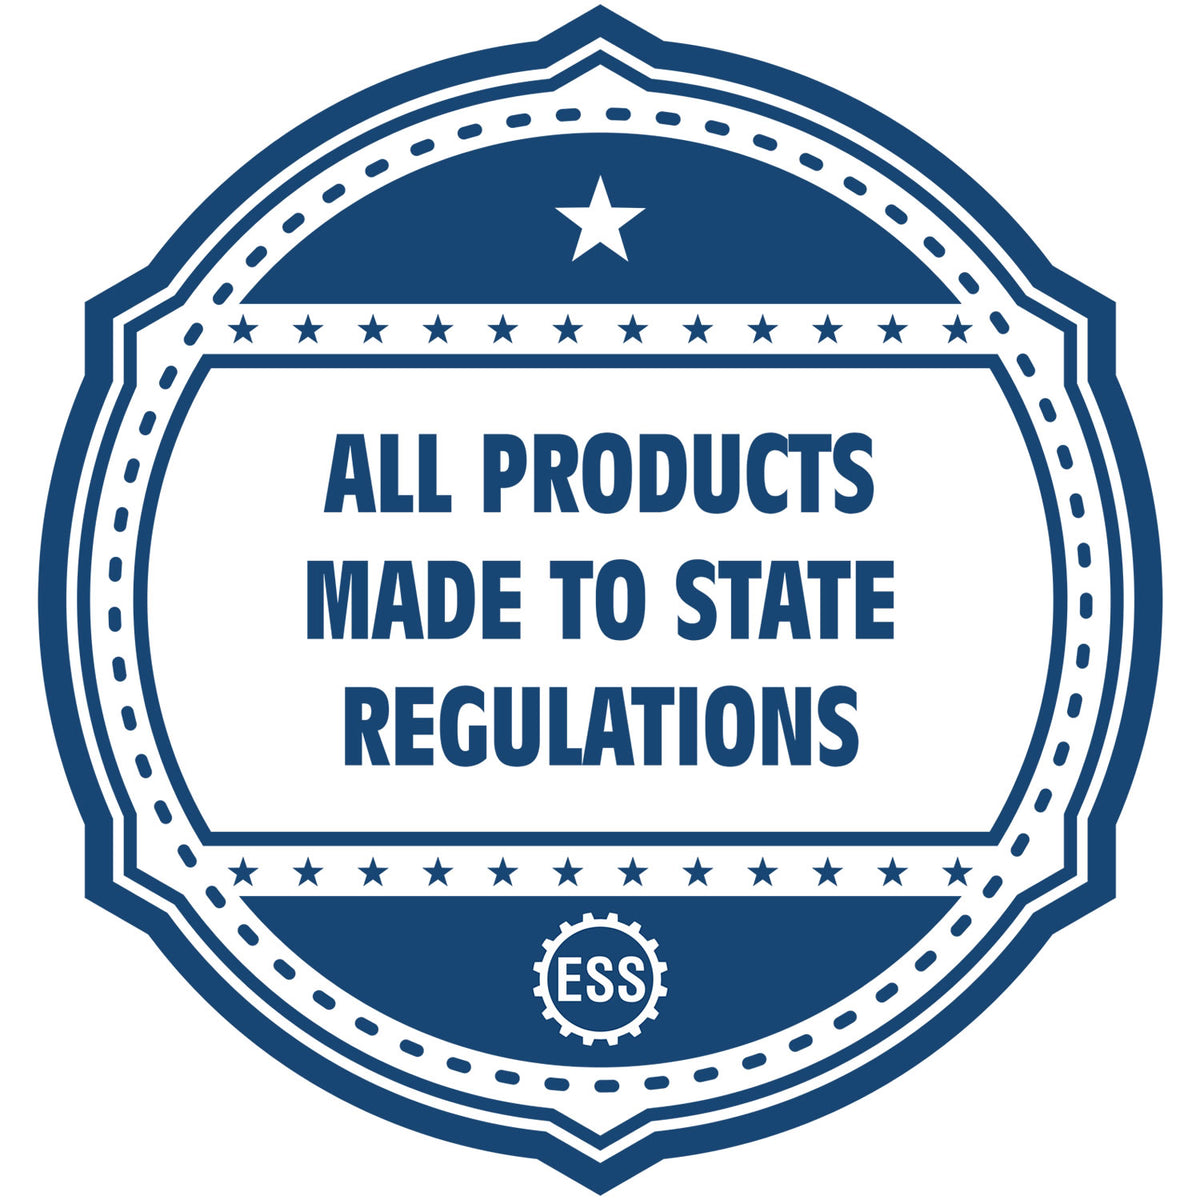 An icon or badge element for the Heavy Duty Cast Iron Ohio Engineer Seal Embosser showing that this product is made in compliance with state regulations.